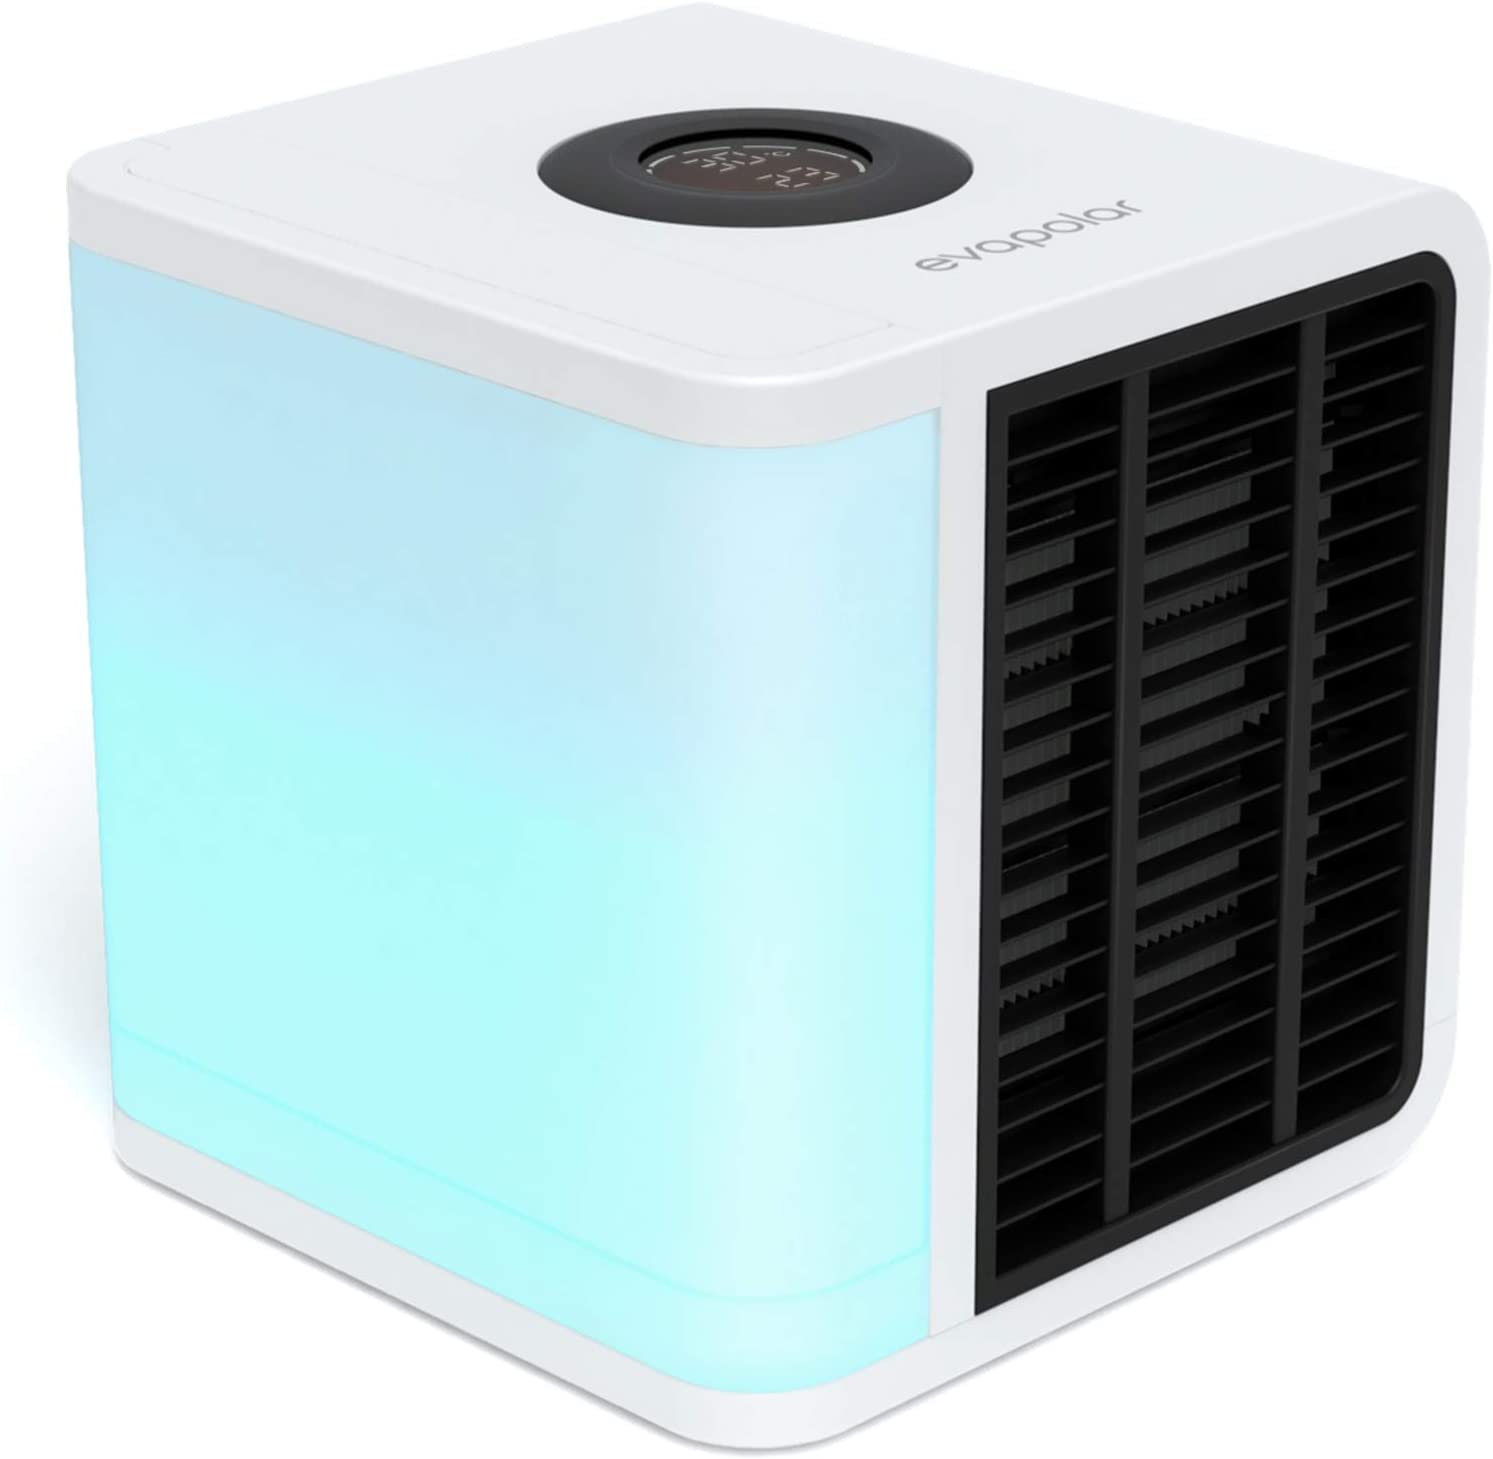 Evapolar evaLIGHT Plus Personal Portable Air Cooler and Humidifier, Desktop Cooling Fan, for Home and Office, with USB Connectivity and Colorful Built-in LED Light, White (EV-1500) - SILBERSHELL